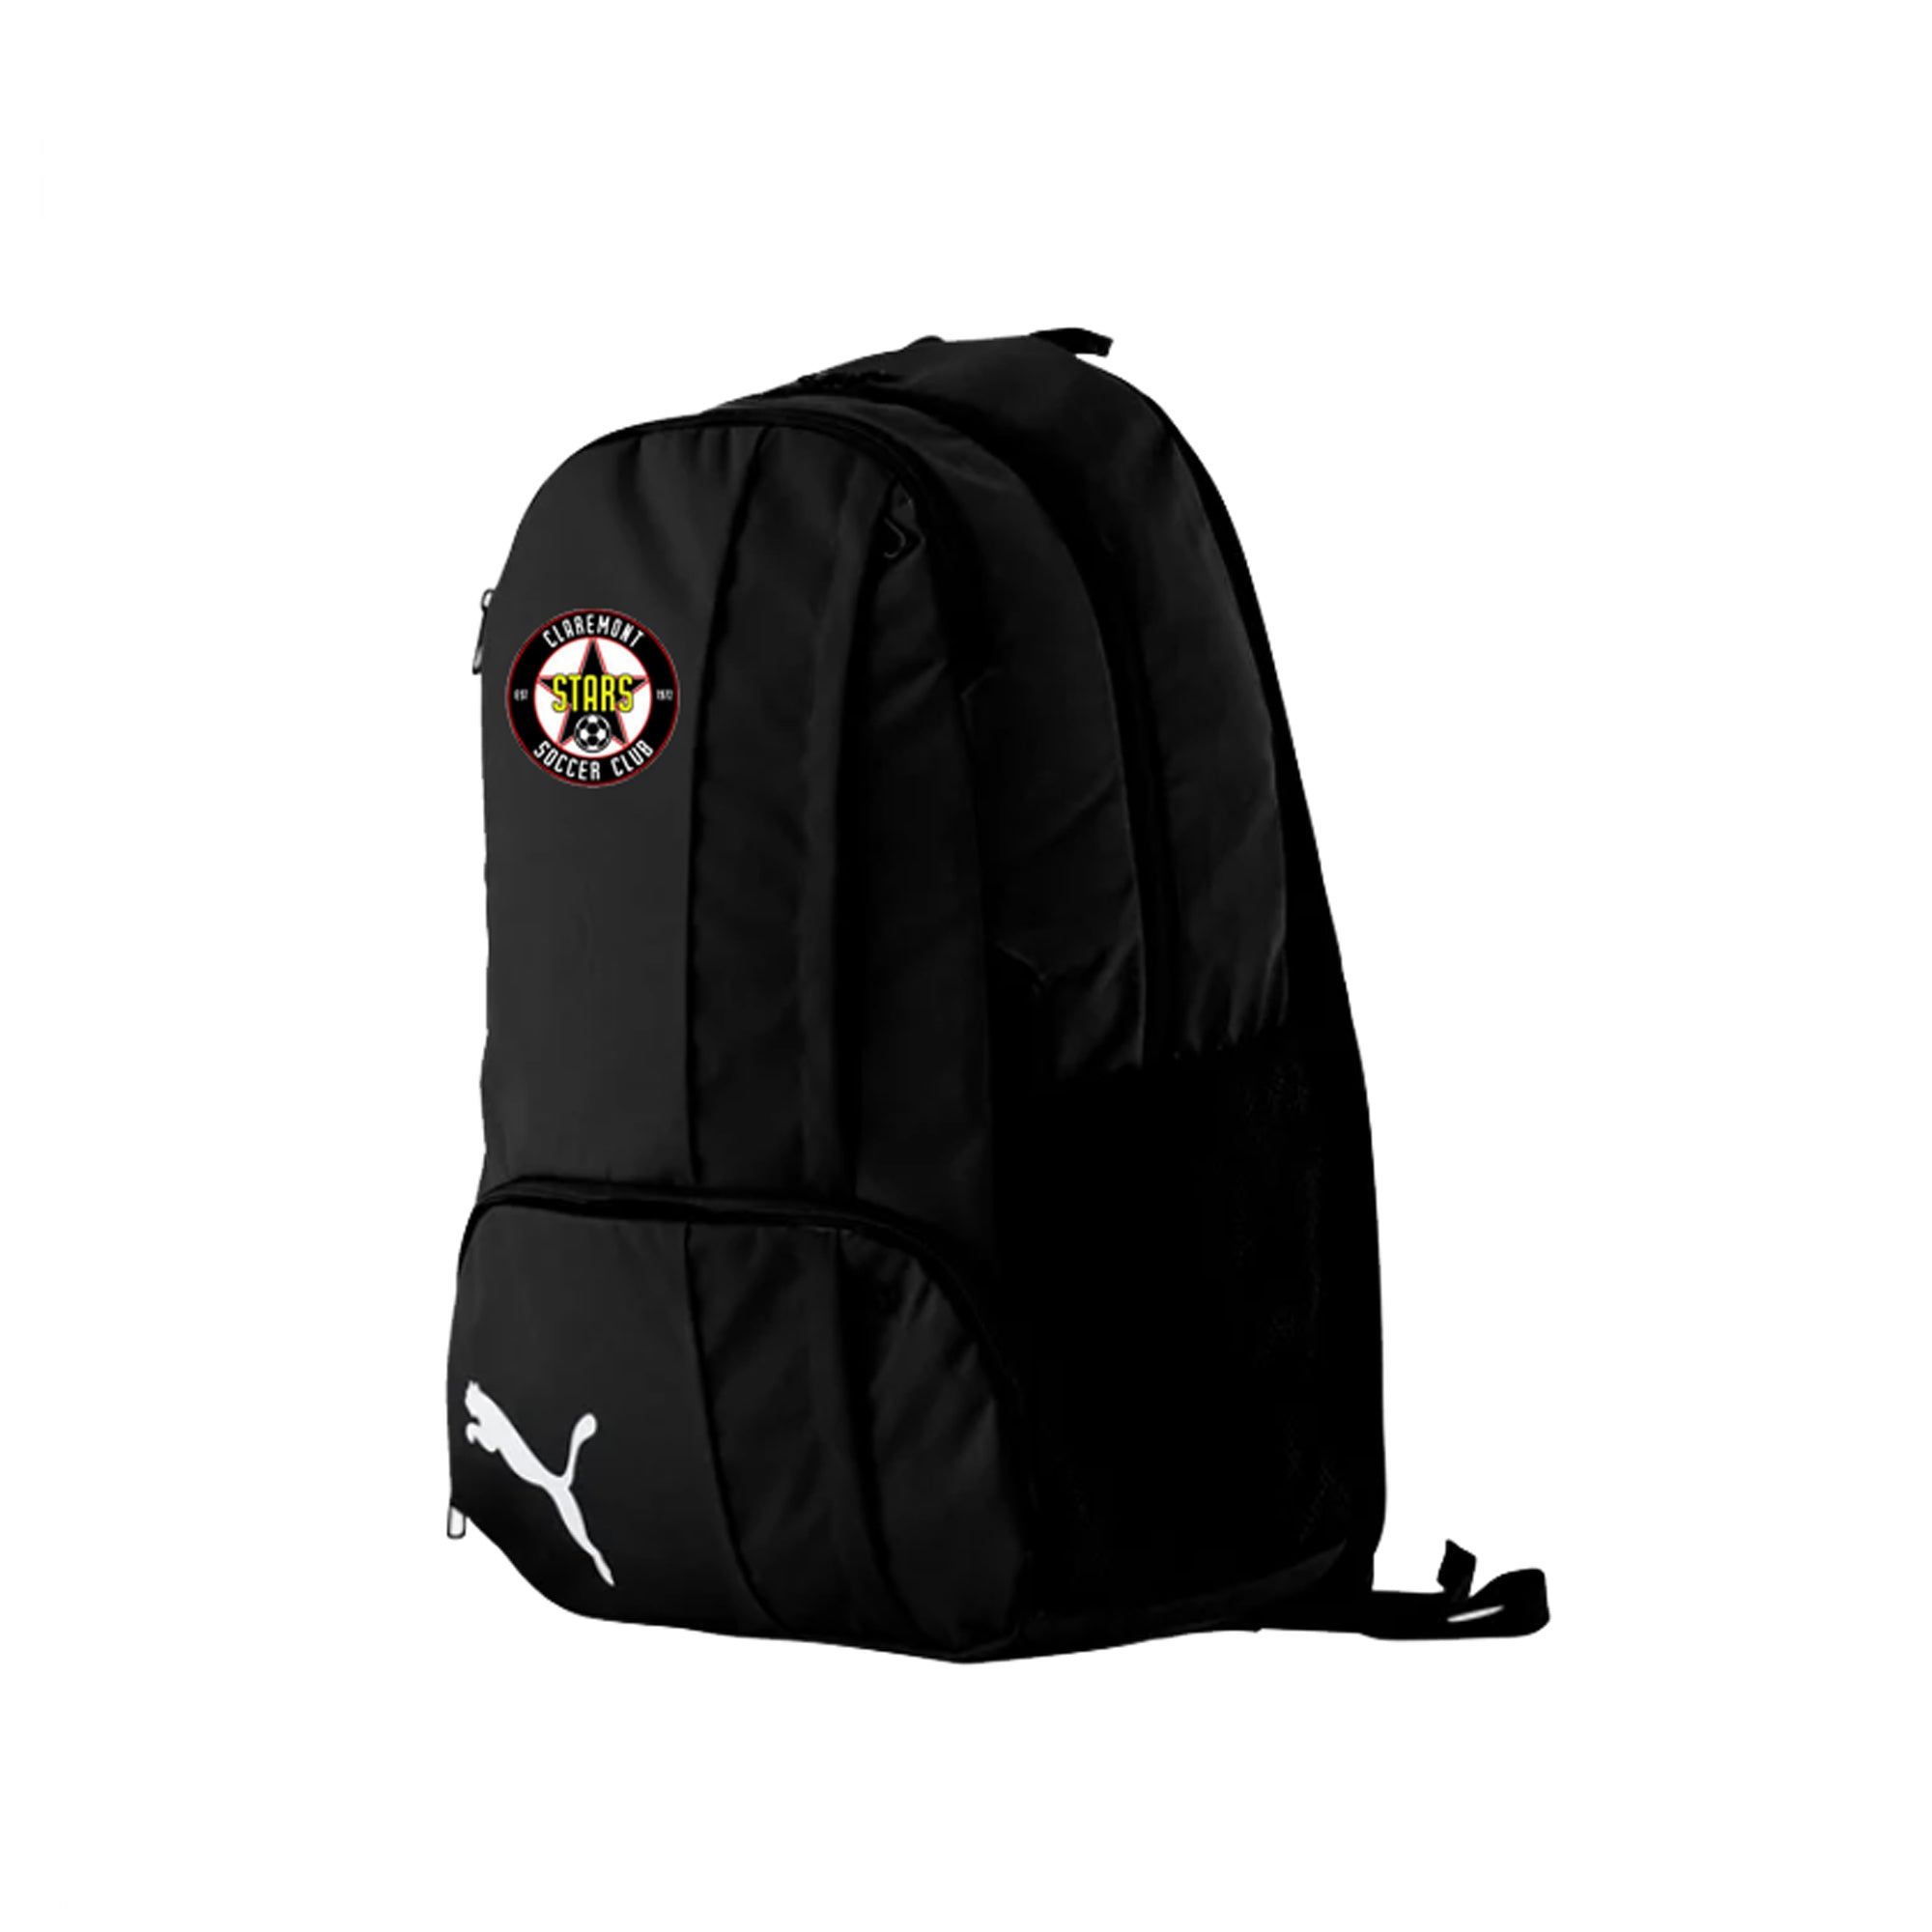 PUMA CLAREMONT STARS TEAM GOAL BACKPACK WITH CREST